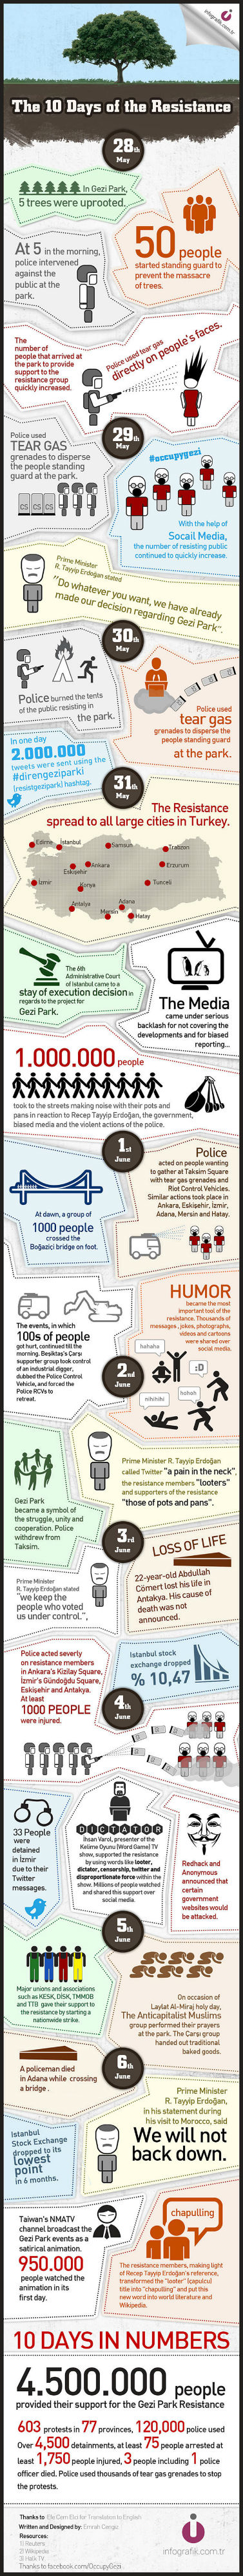 Infographic explains Occupy Turkey protests